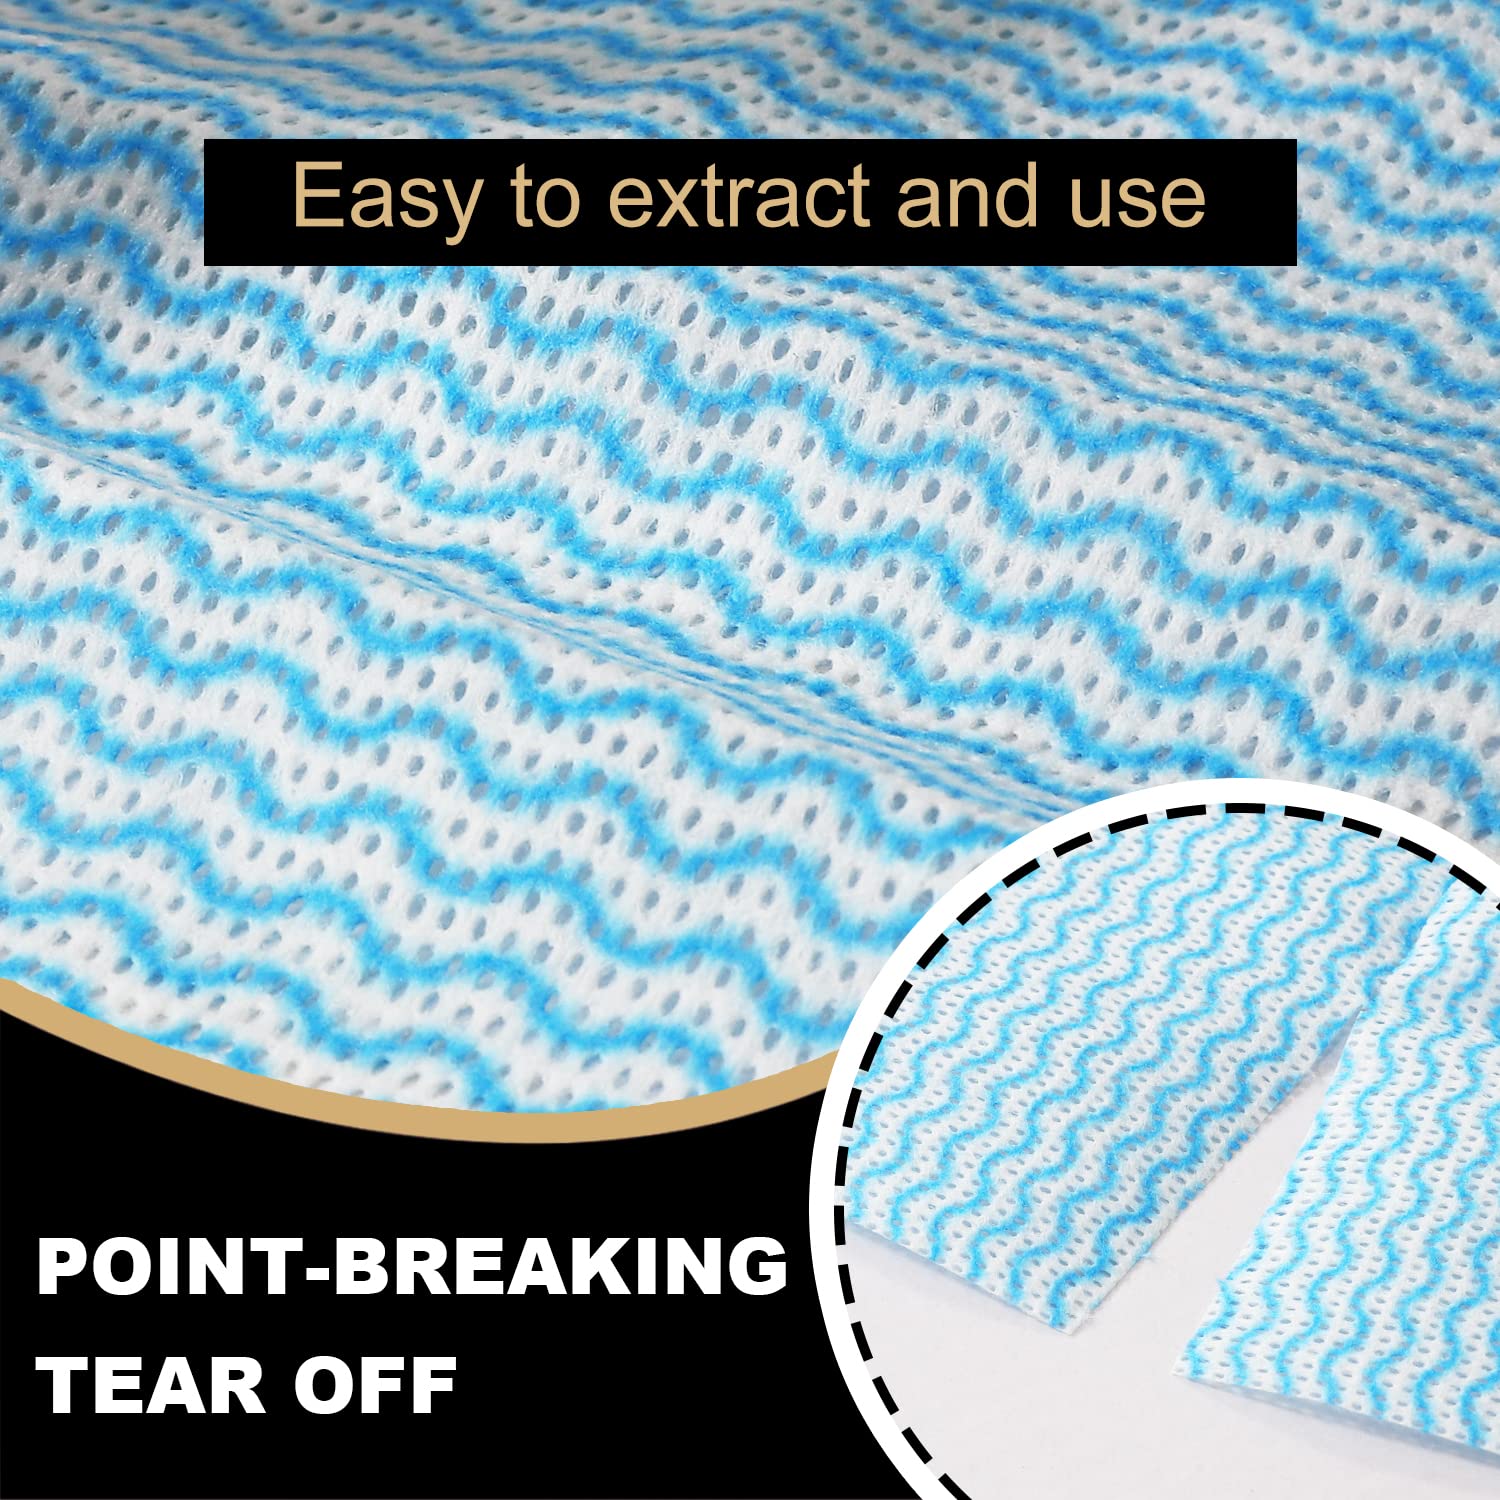 Supmaquc Reusable Cleaning Cloths Disposable Cleaning Towels Kitchen Dish Paper Towels Multipurpose Household Towels Thickened No Woven Handy Wipes, 2 Rolls of 100 Sheets, 7.9